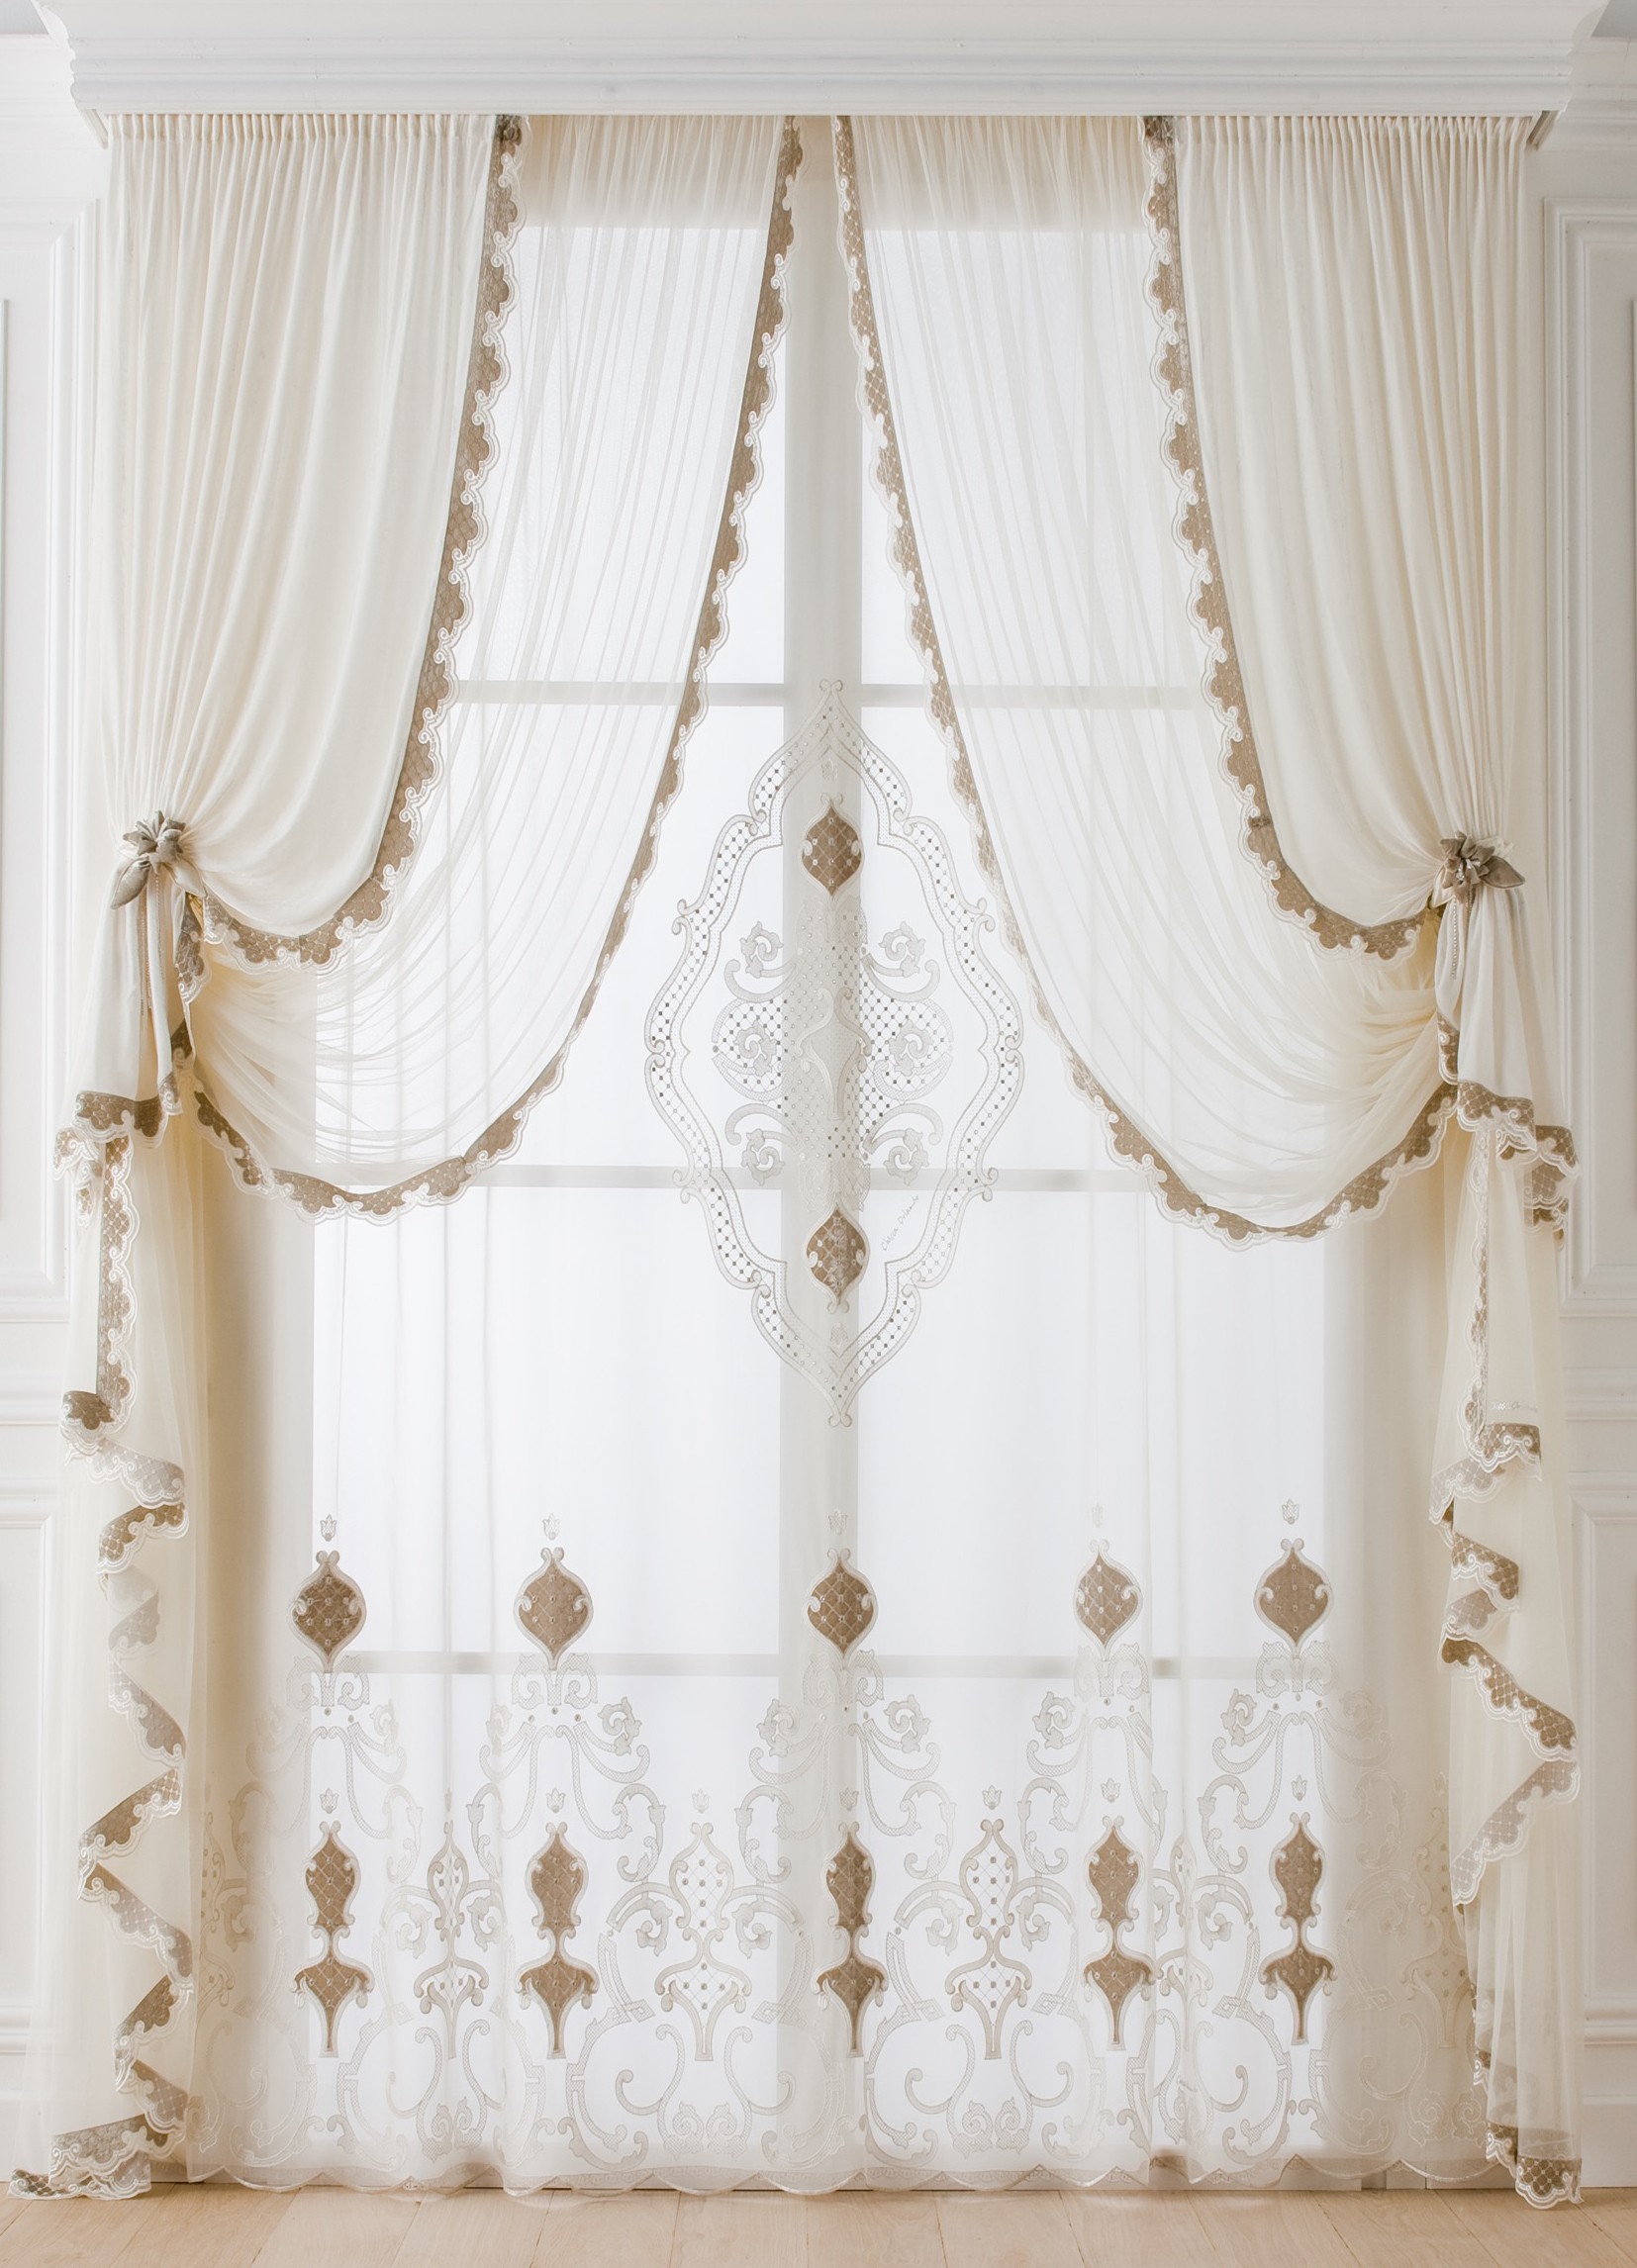 Custom Window Treatments Hand made draperies from our Masterpiece Collection. 71